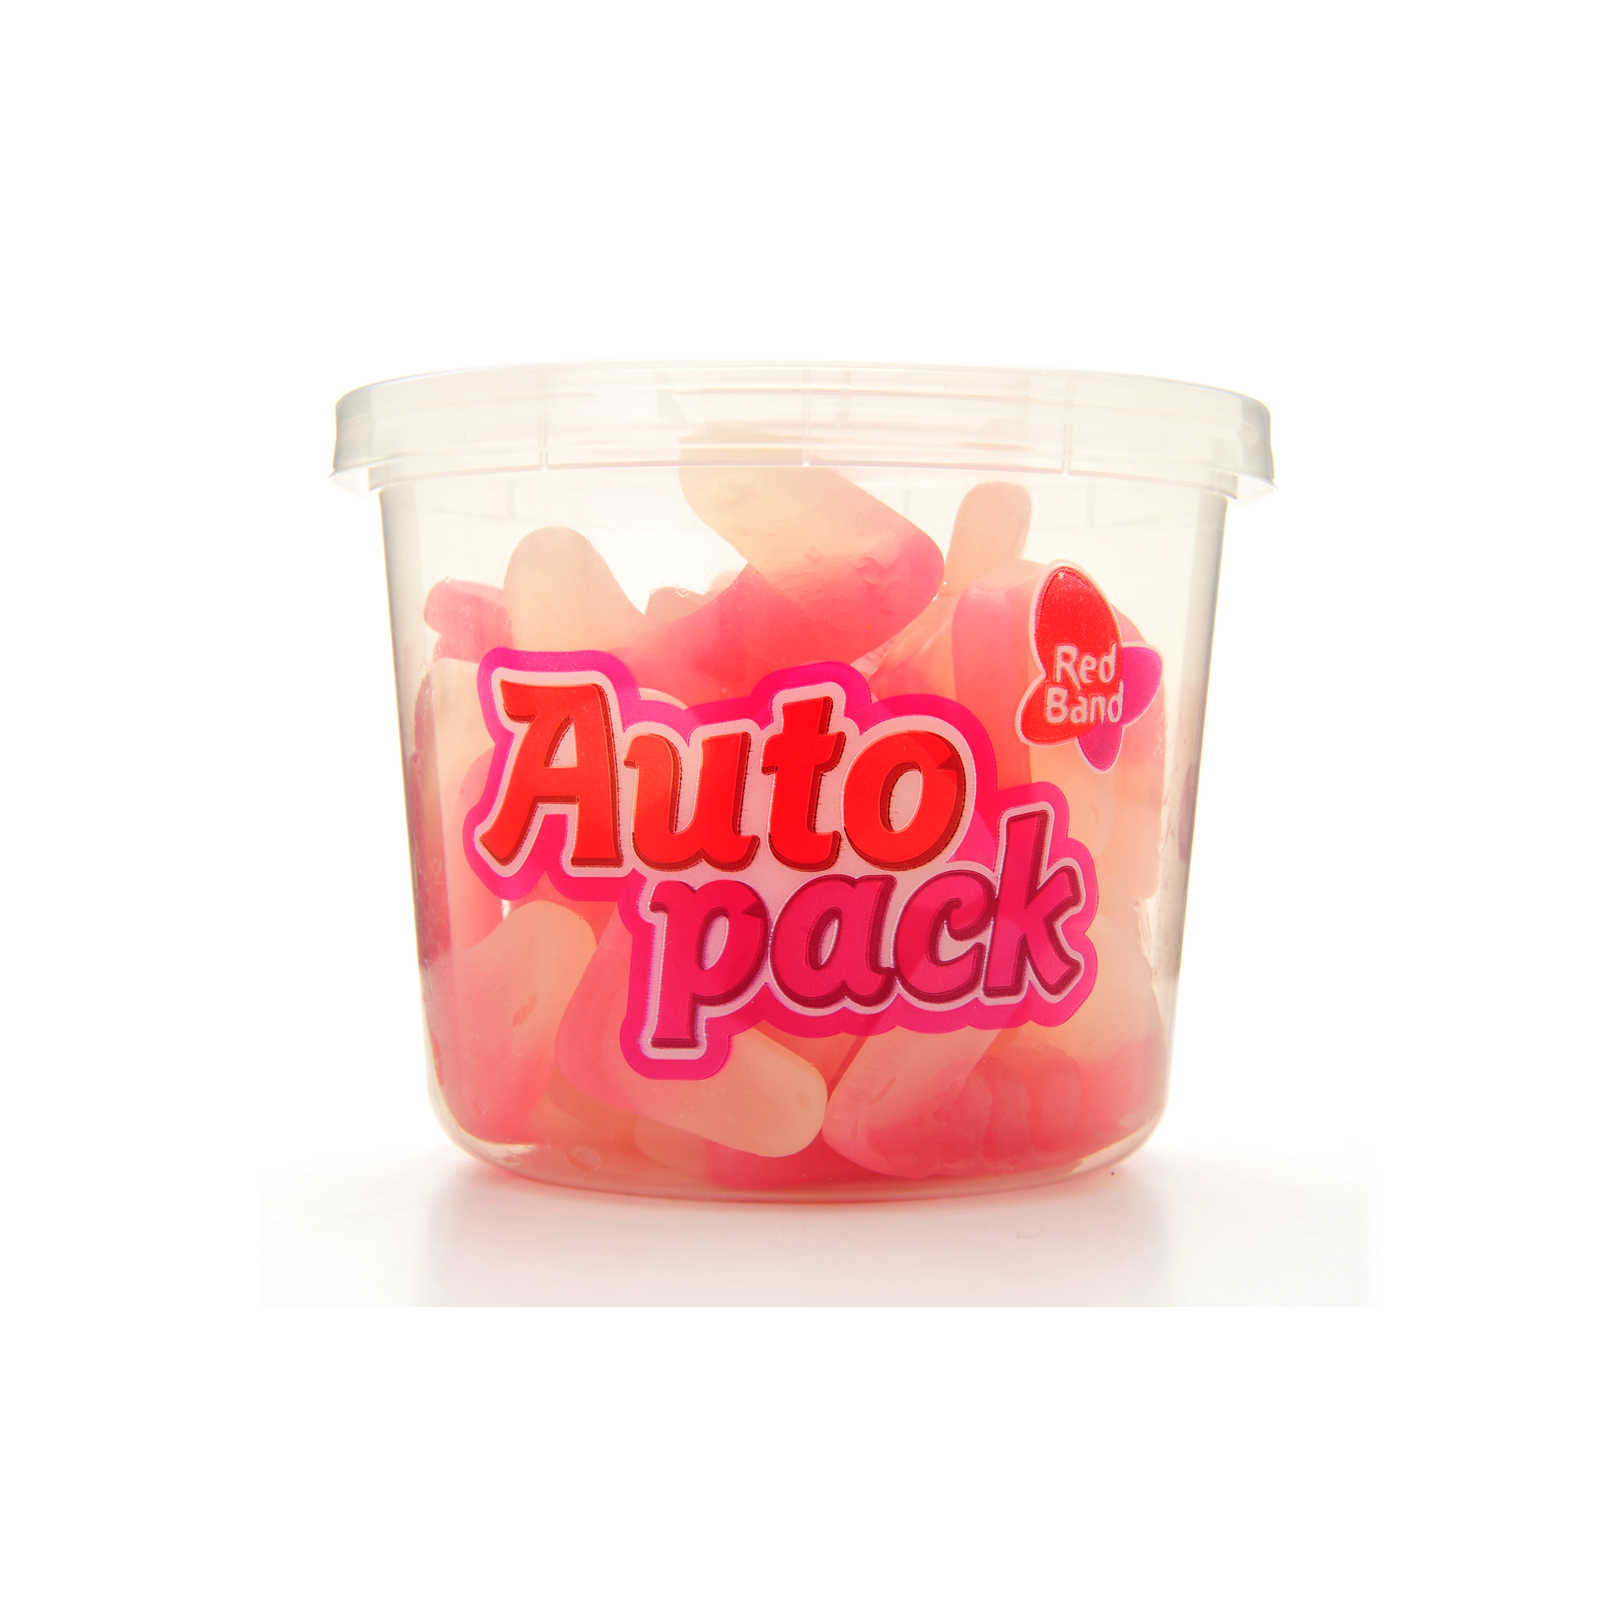 Autopack-Red Band